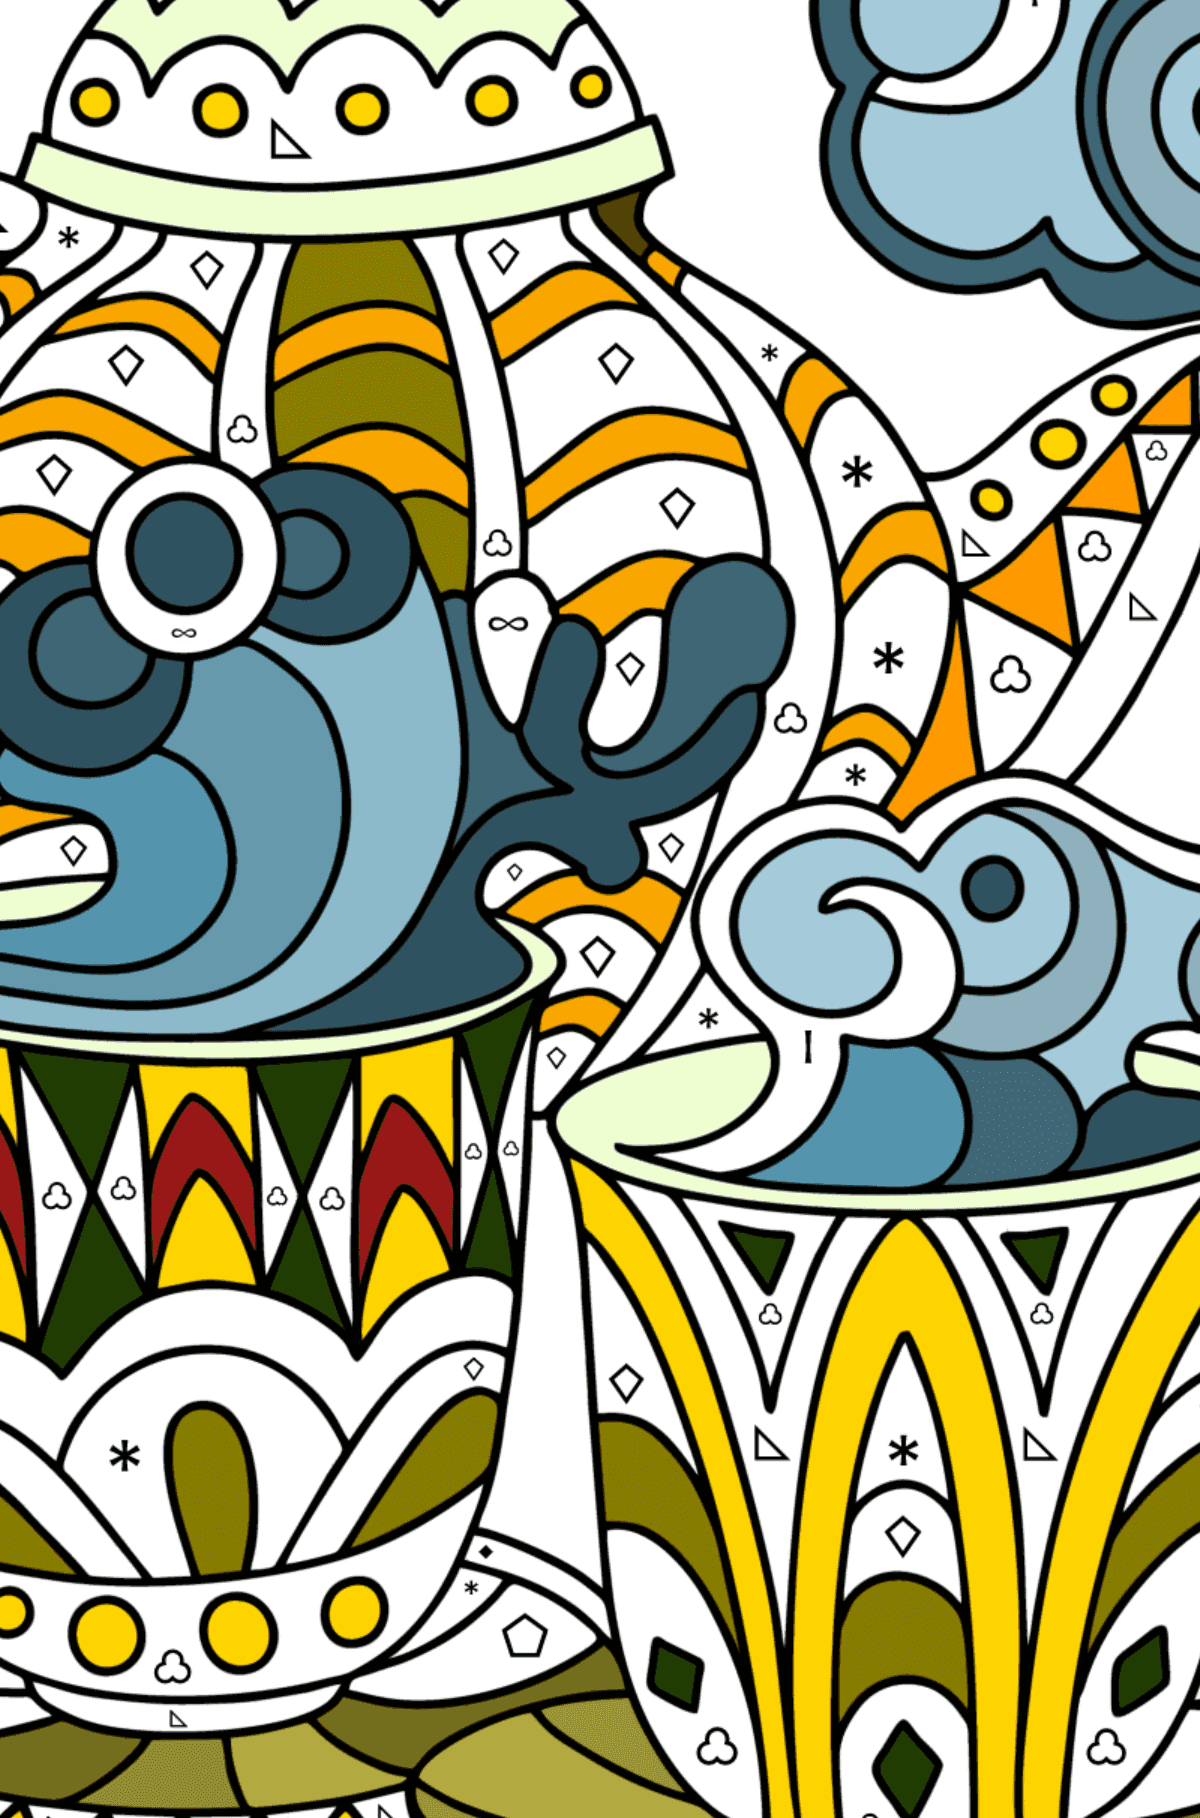 Doodle Coloring Page for Kids - Tea Party - Coloring by Symbols and Geometric Shapes for Kids